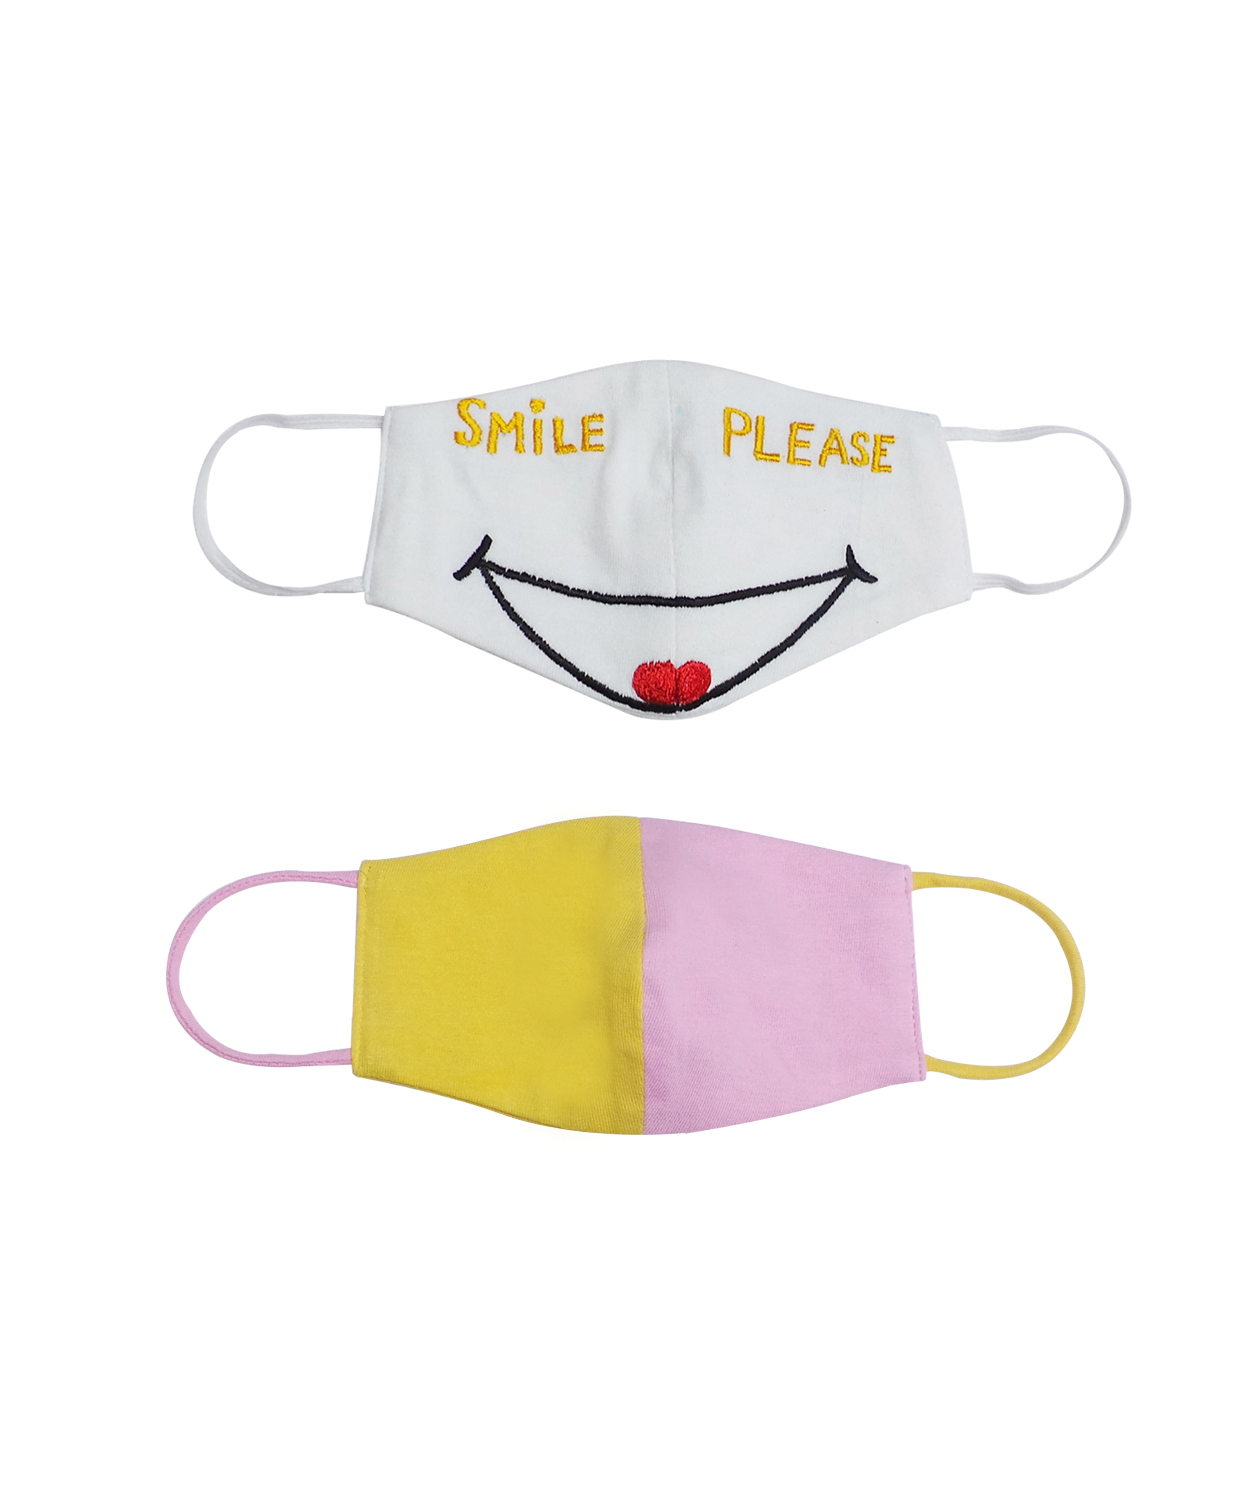 Keep Smiling Mask And Color Block Mask - Set of 2